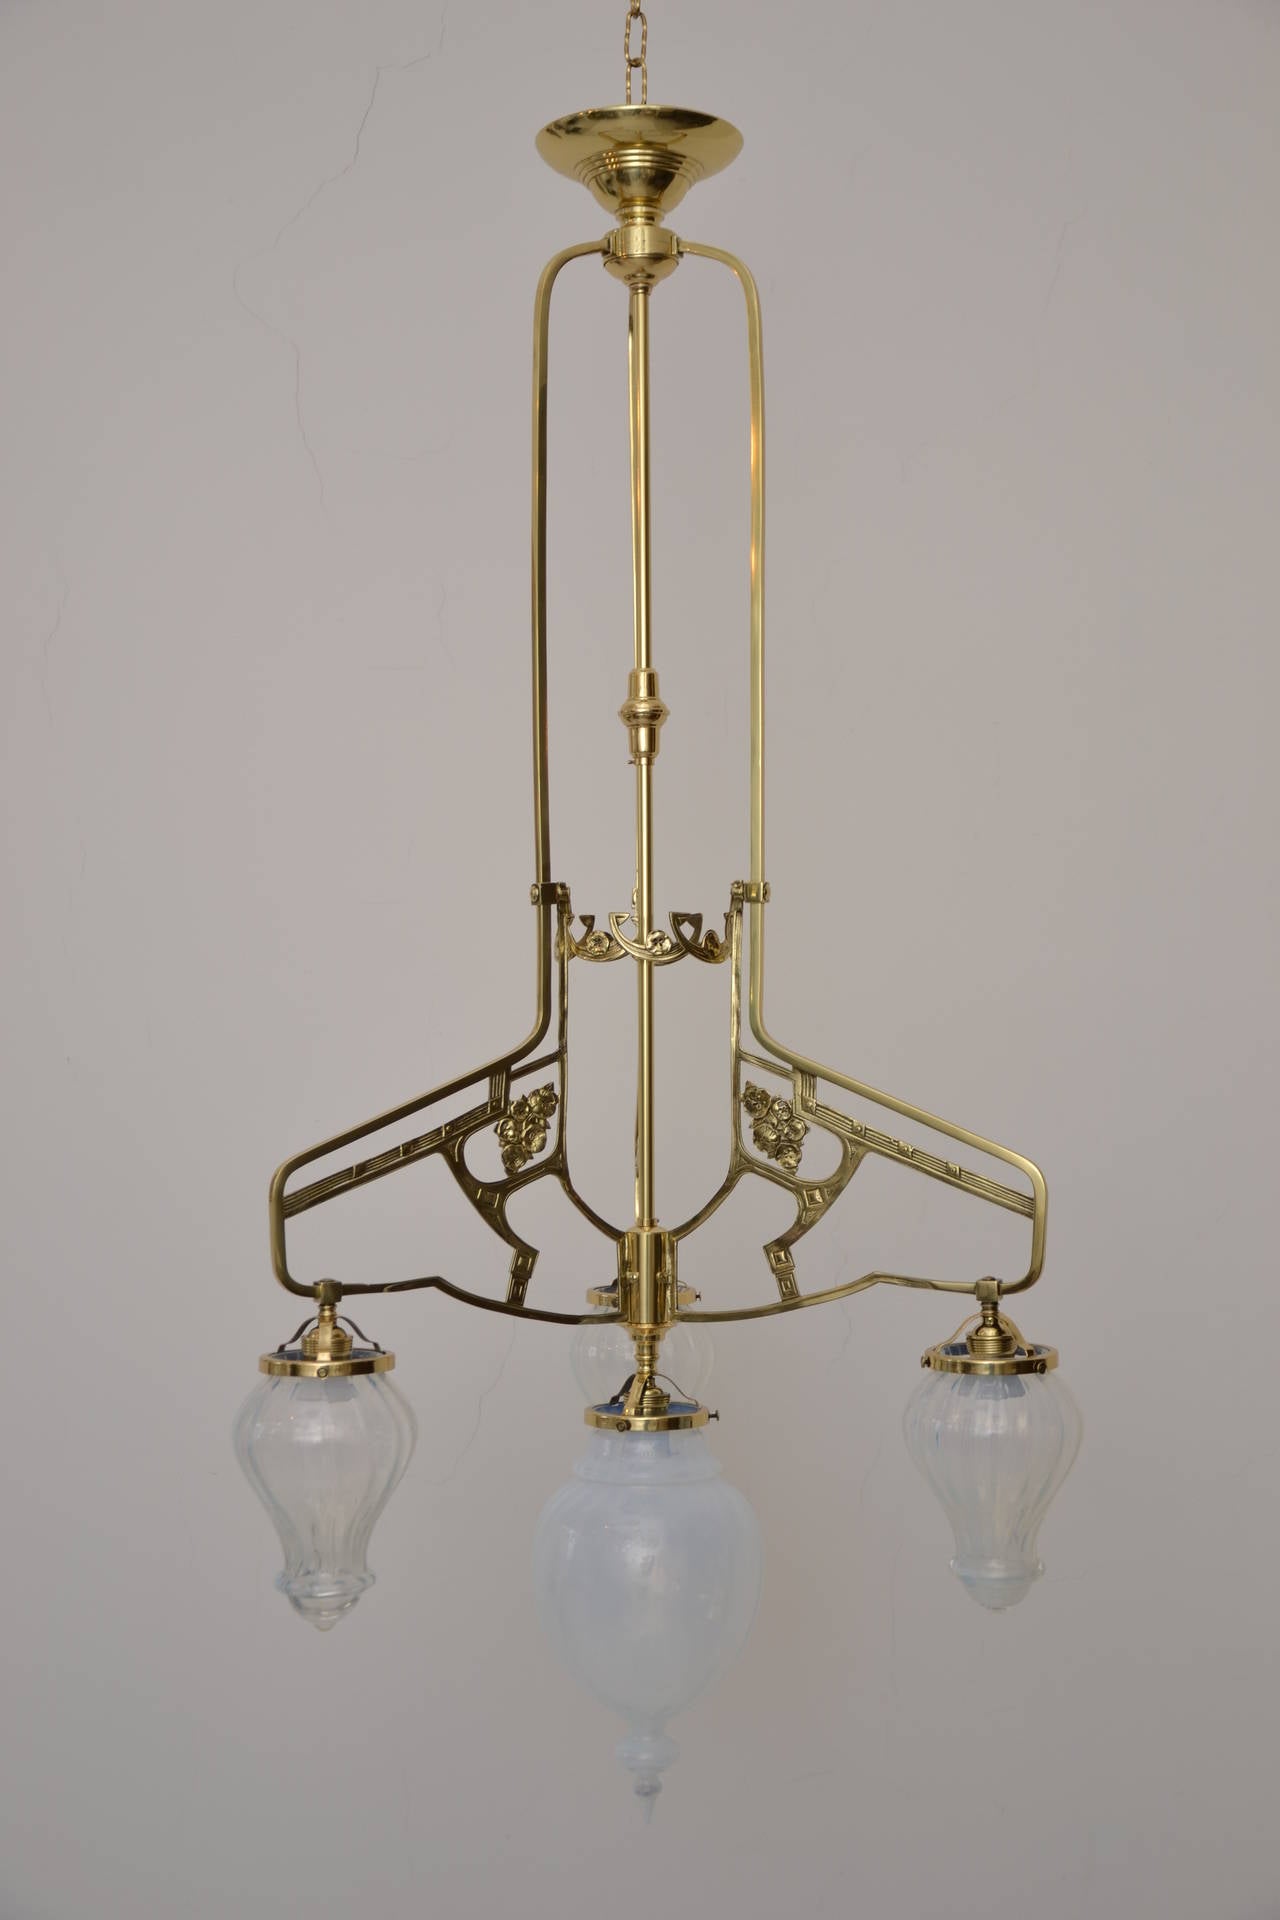 Art Nouveau Flower ceiling Lamp with 4 original opaline glass shades 
Polished and stove enamelled